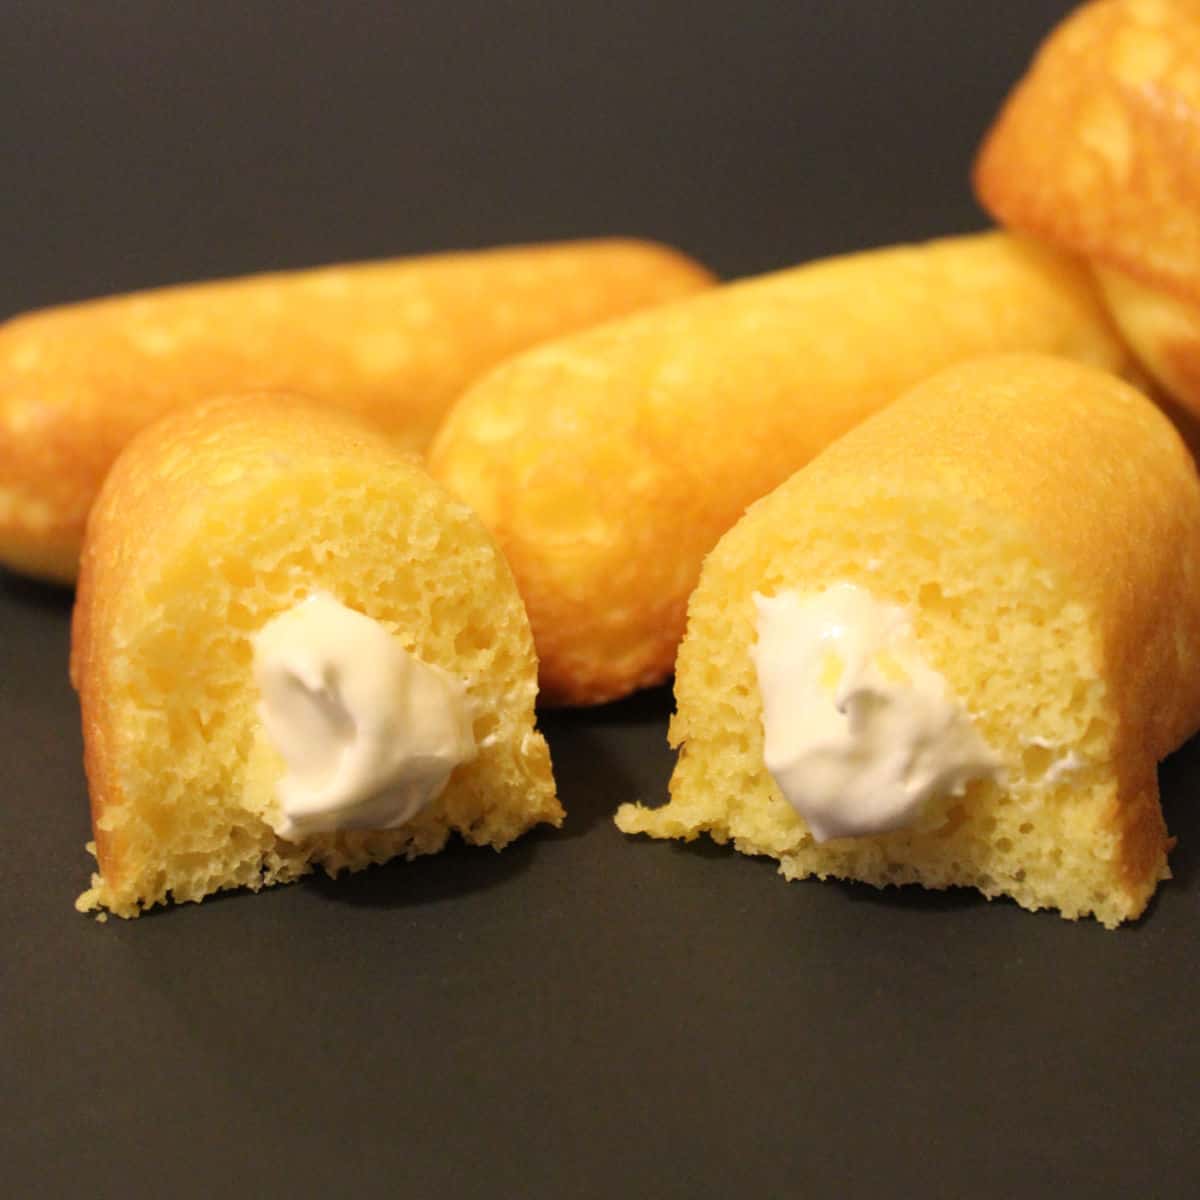 Homemade Twinkies on a black background